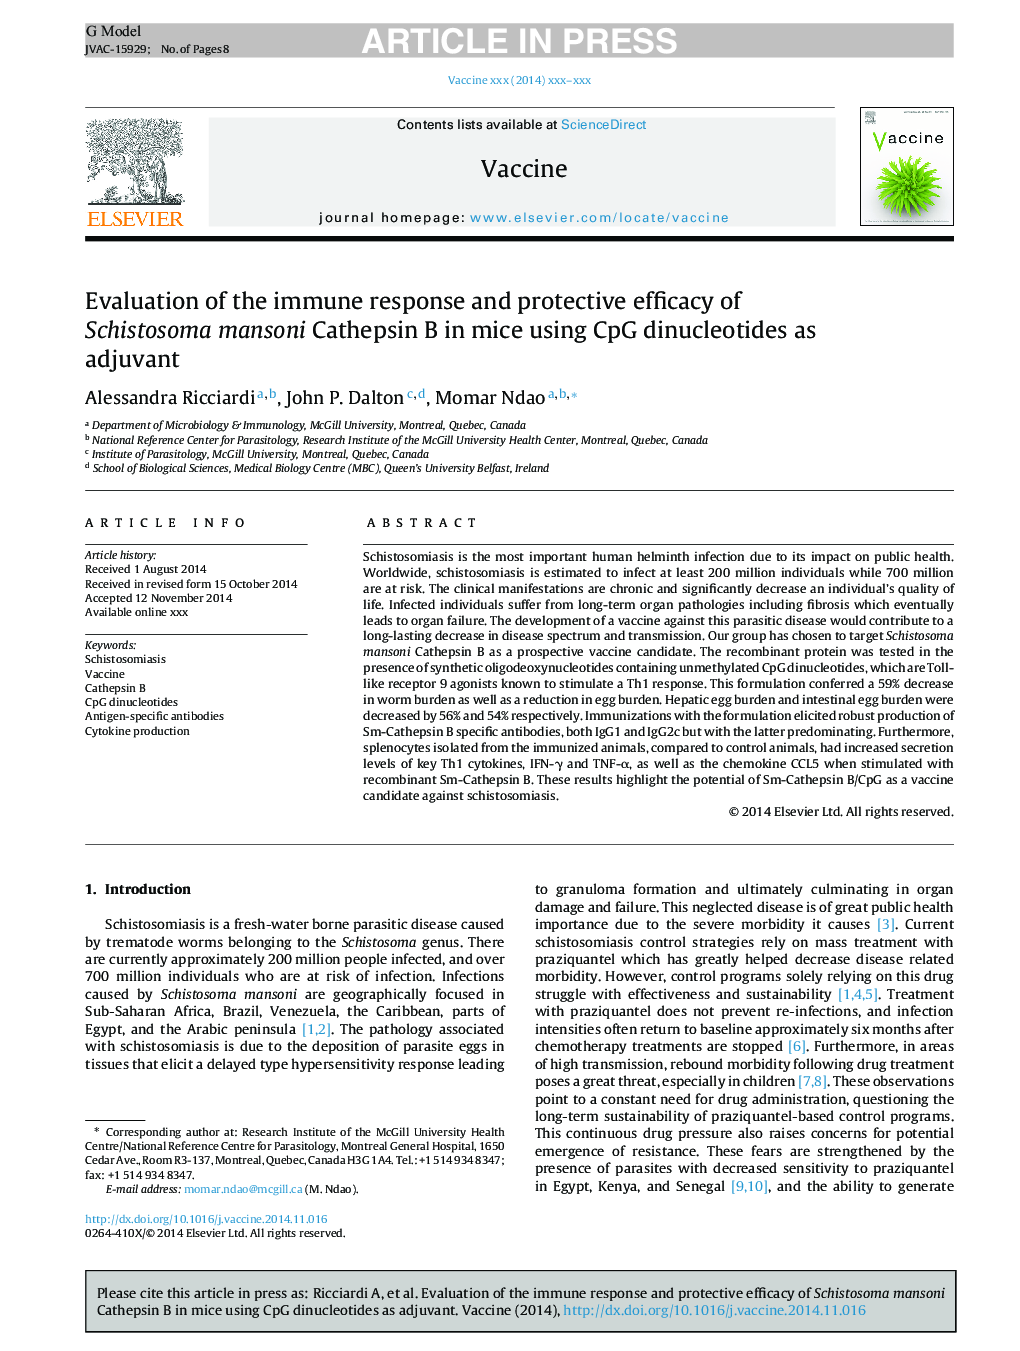 Evaluation of the immune response and protective efficacy of Schistosoma mansoni Cathepsin B in mice using CpG dinucleotides as adjuvant